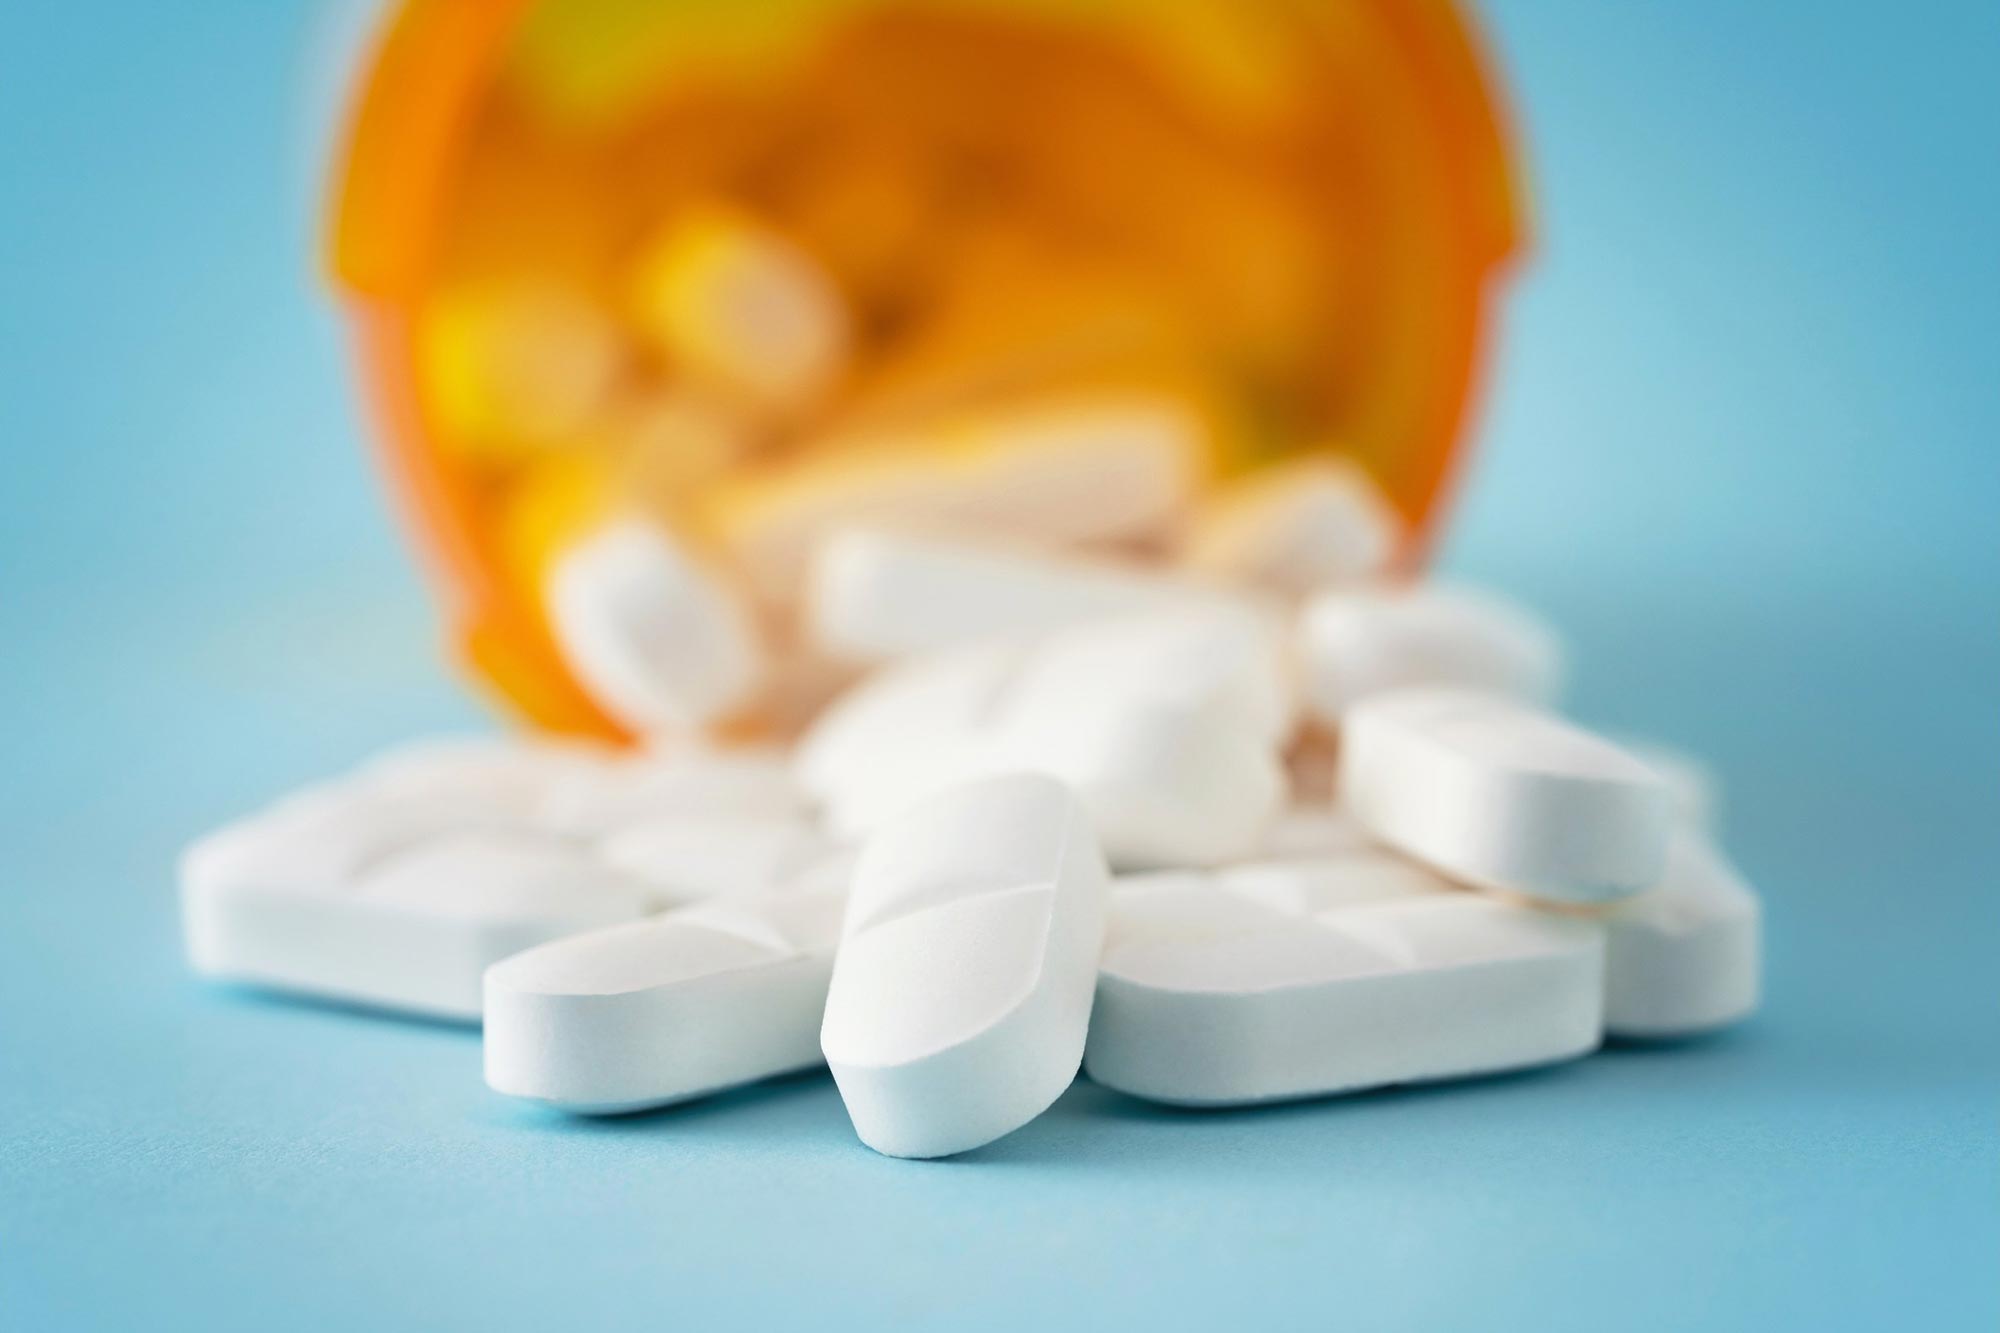 A New Promising Option to Opioids for Dental Discomfort